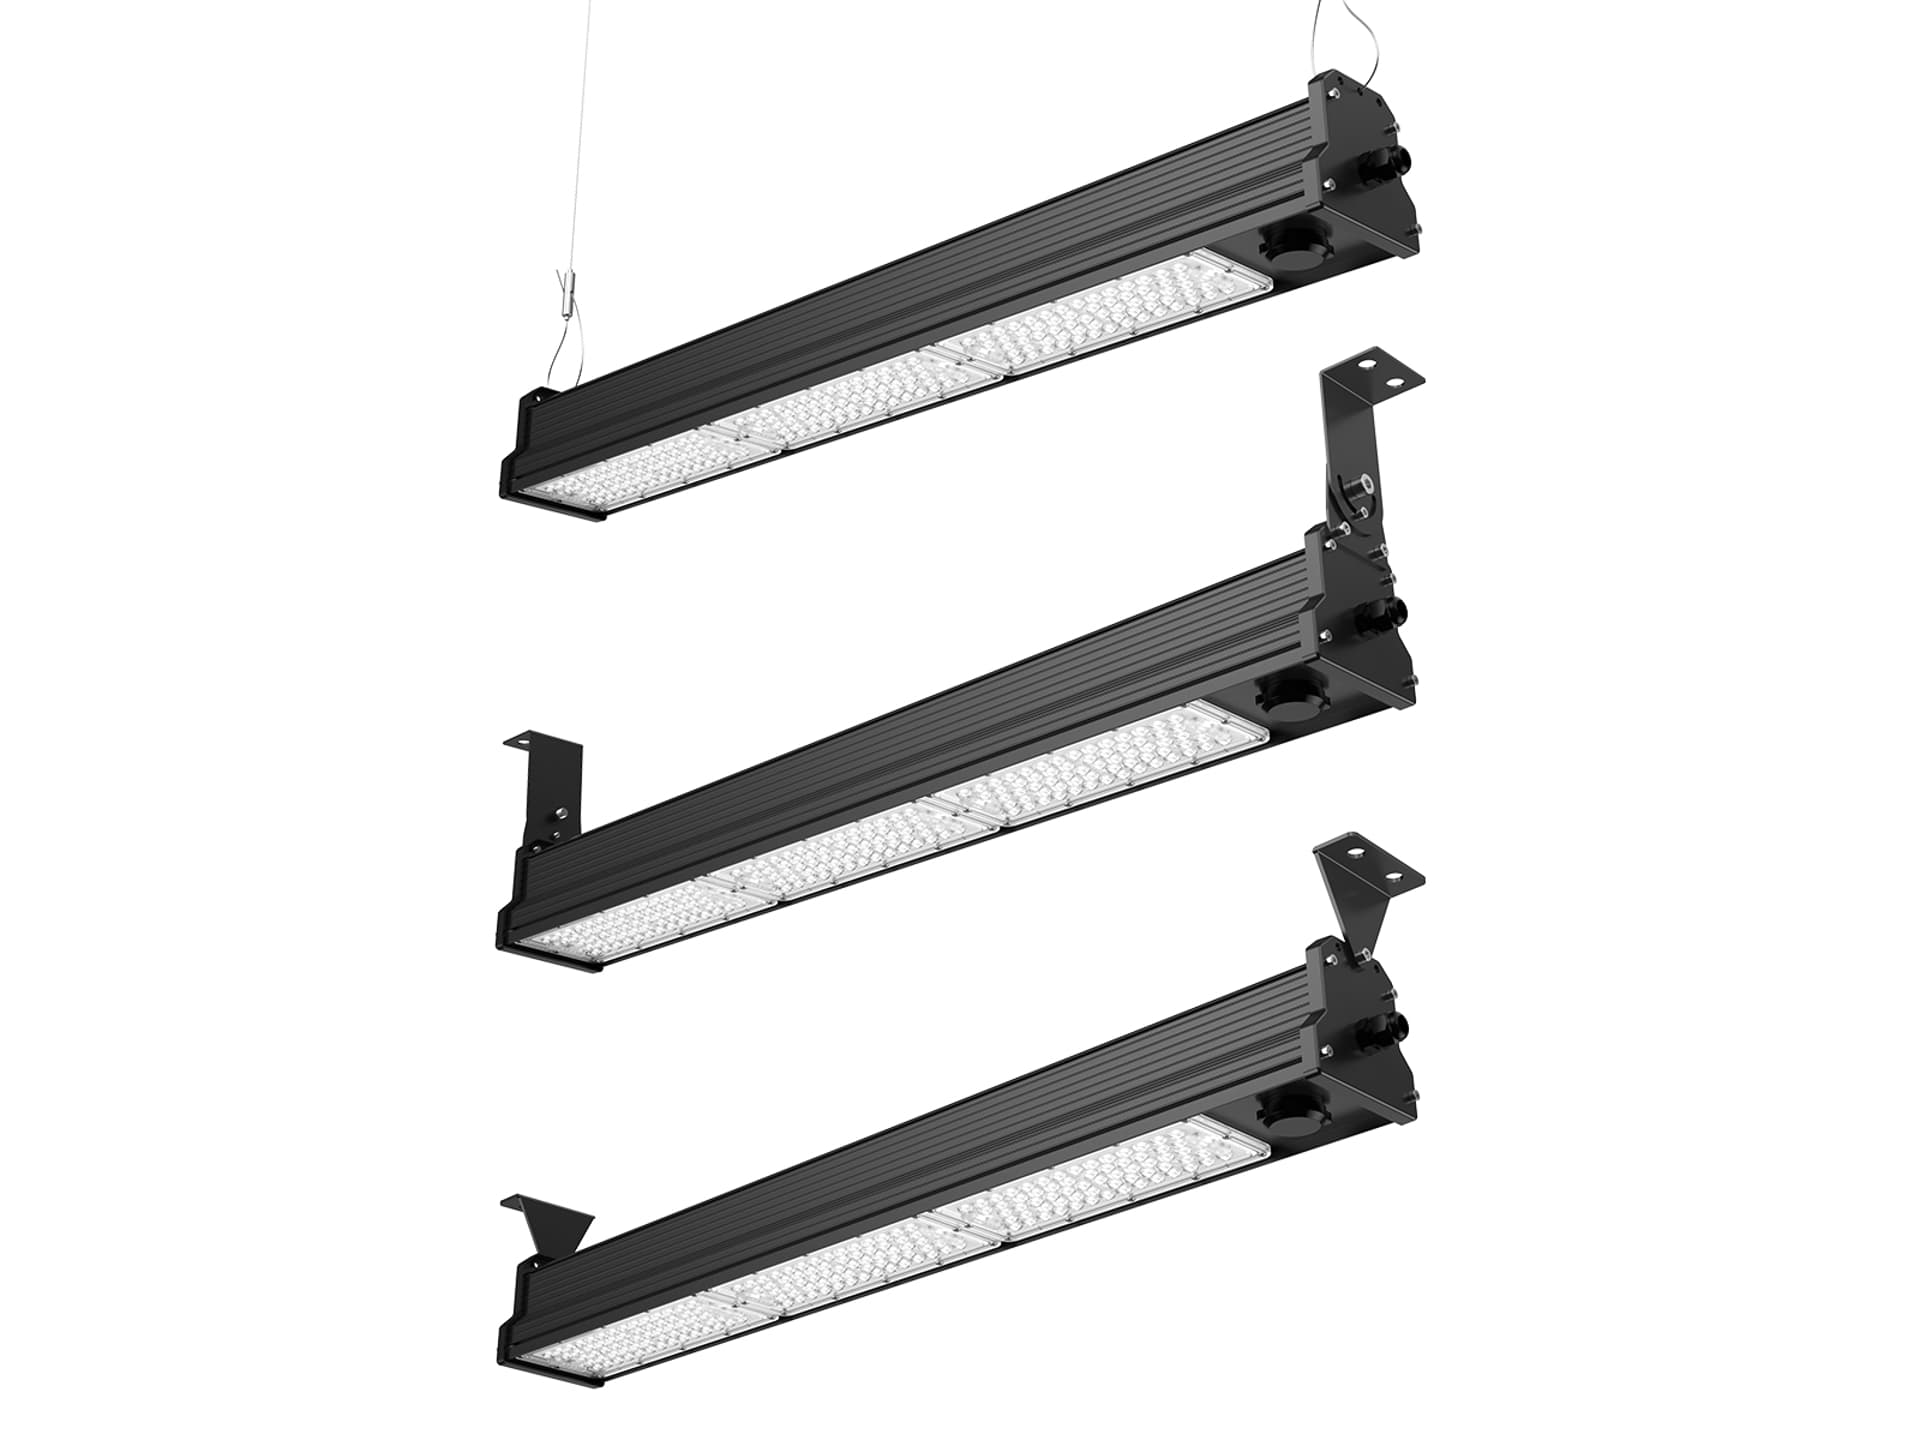 LHB42 LED Linear Light with suspending ceiling rotatable bracket mounting